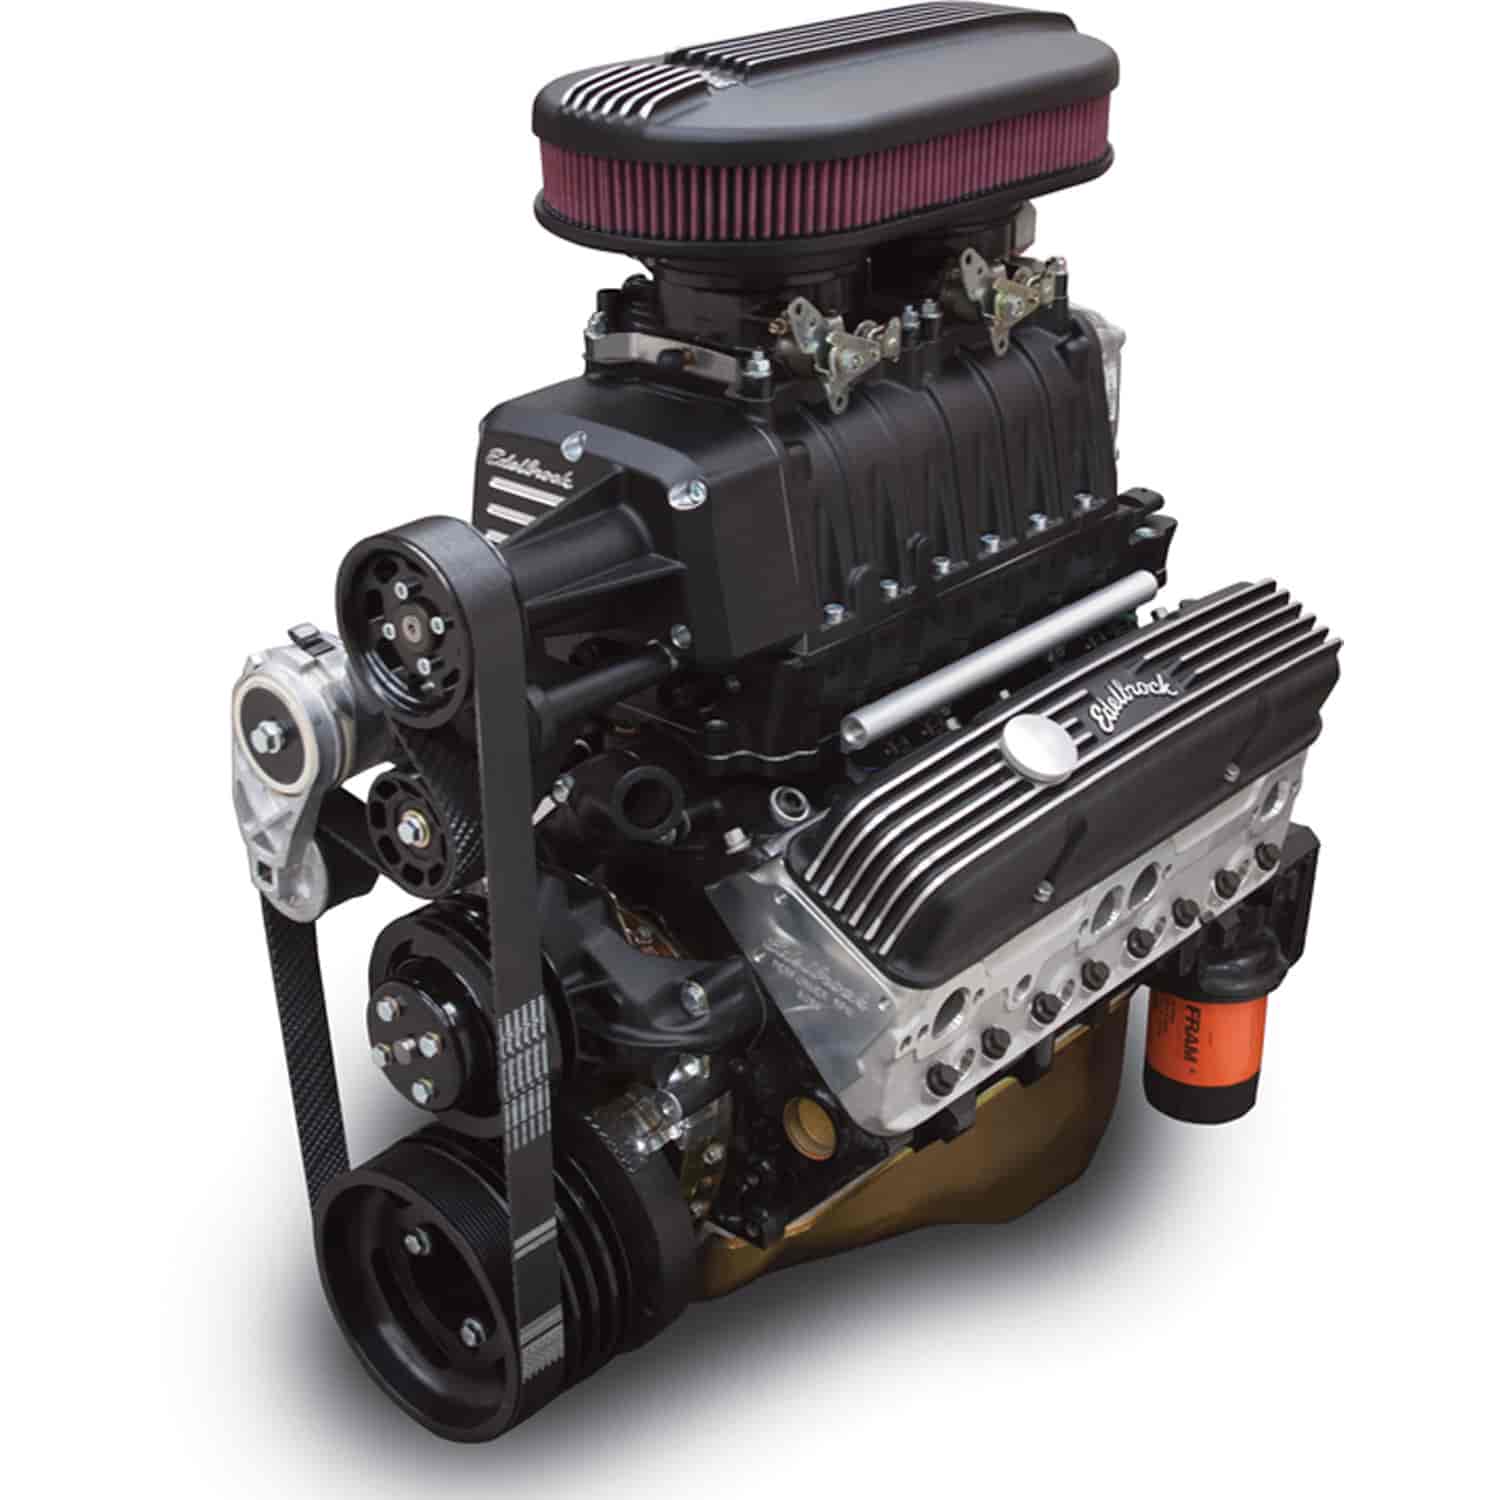 E-Force Enforcer RPM Complete EFI Black Supercharger Kit for 1955-1986 Small Block Chevy with Vortec Heads